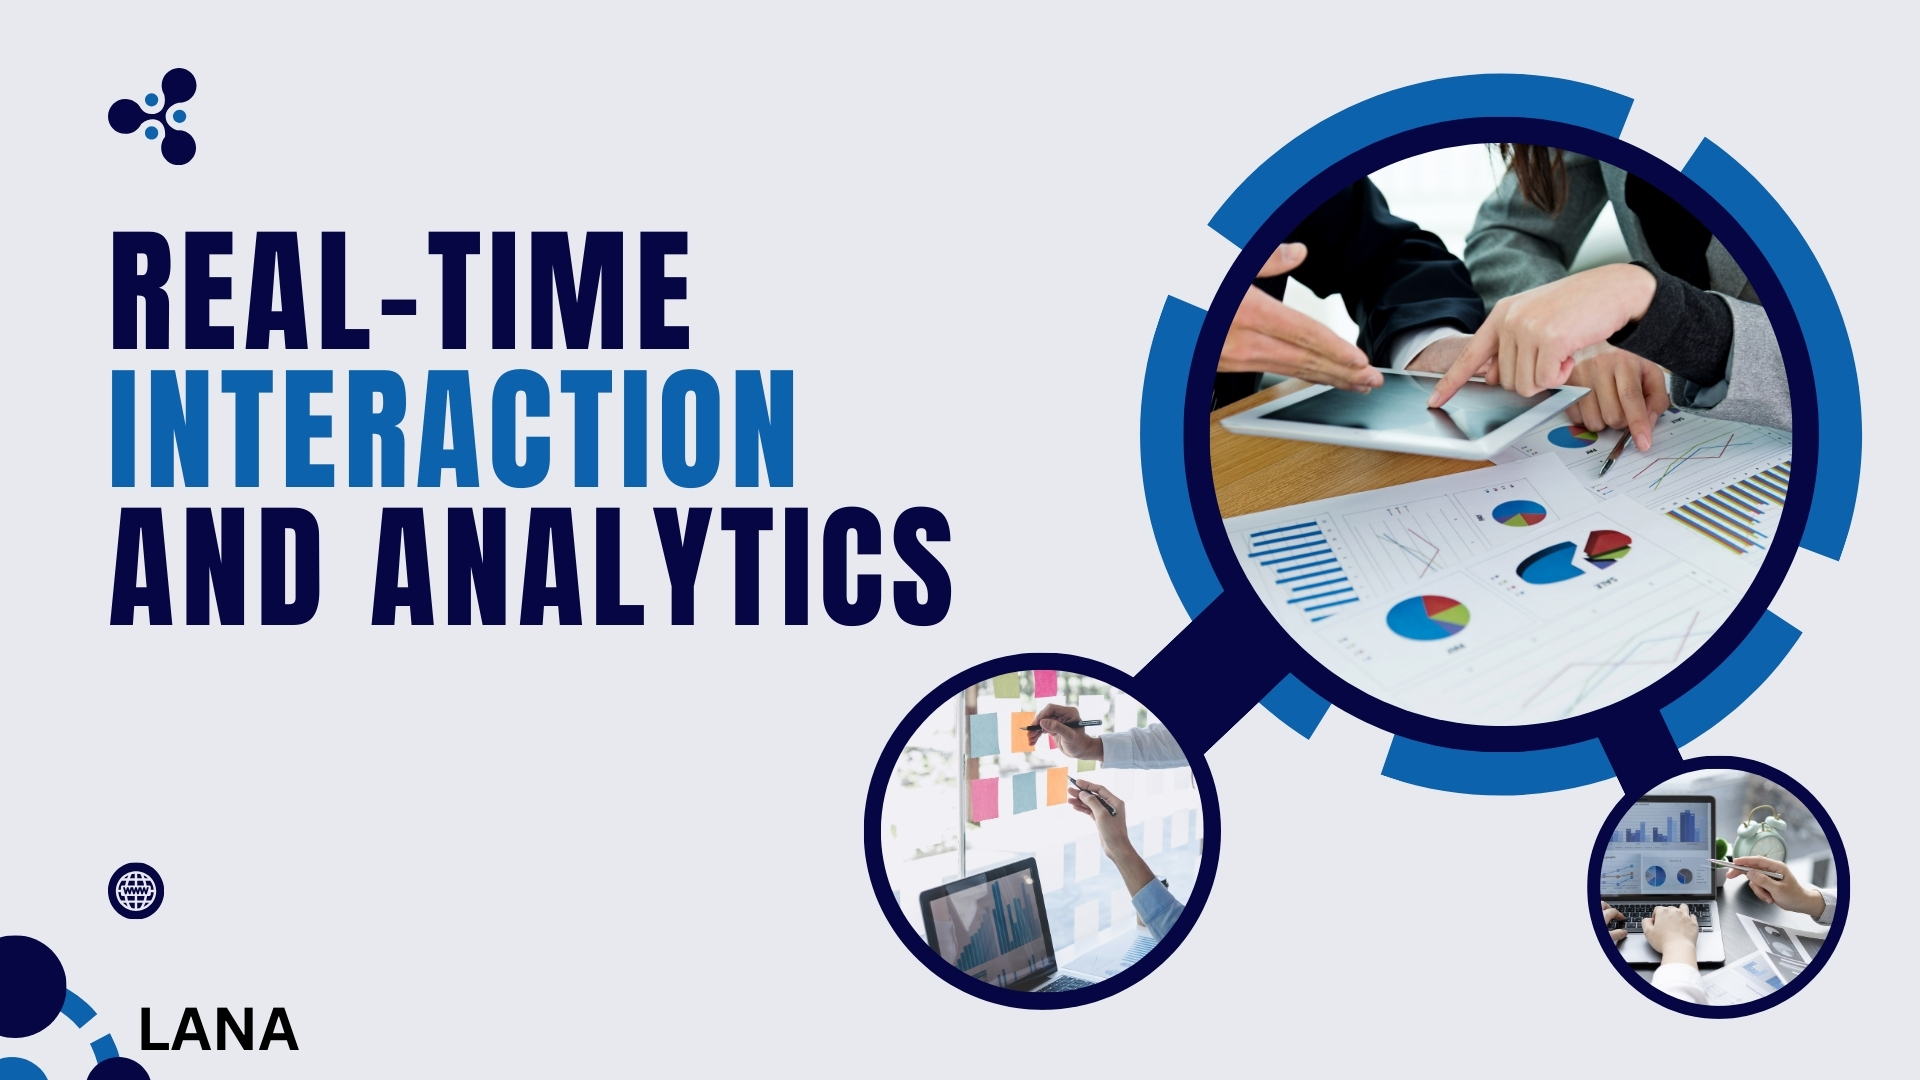 Real-Time Interaction and Analytics